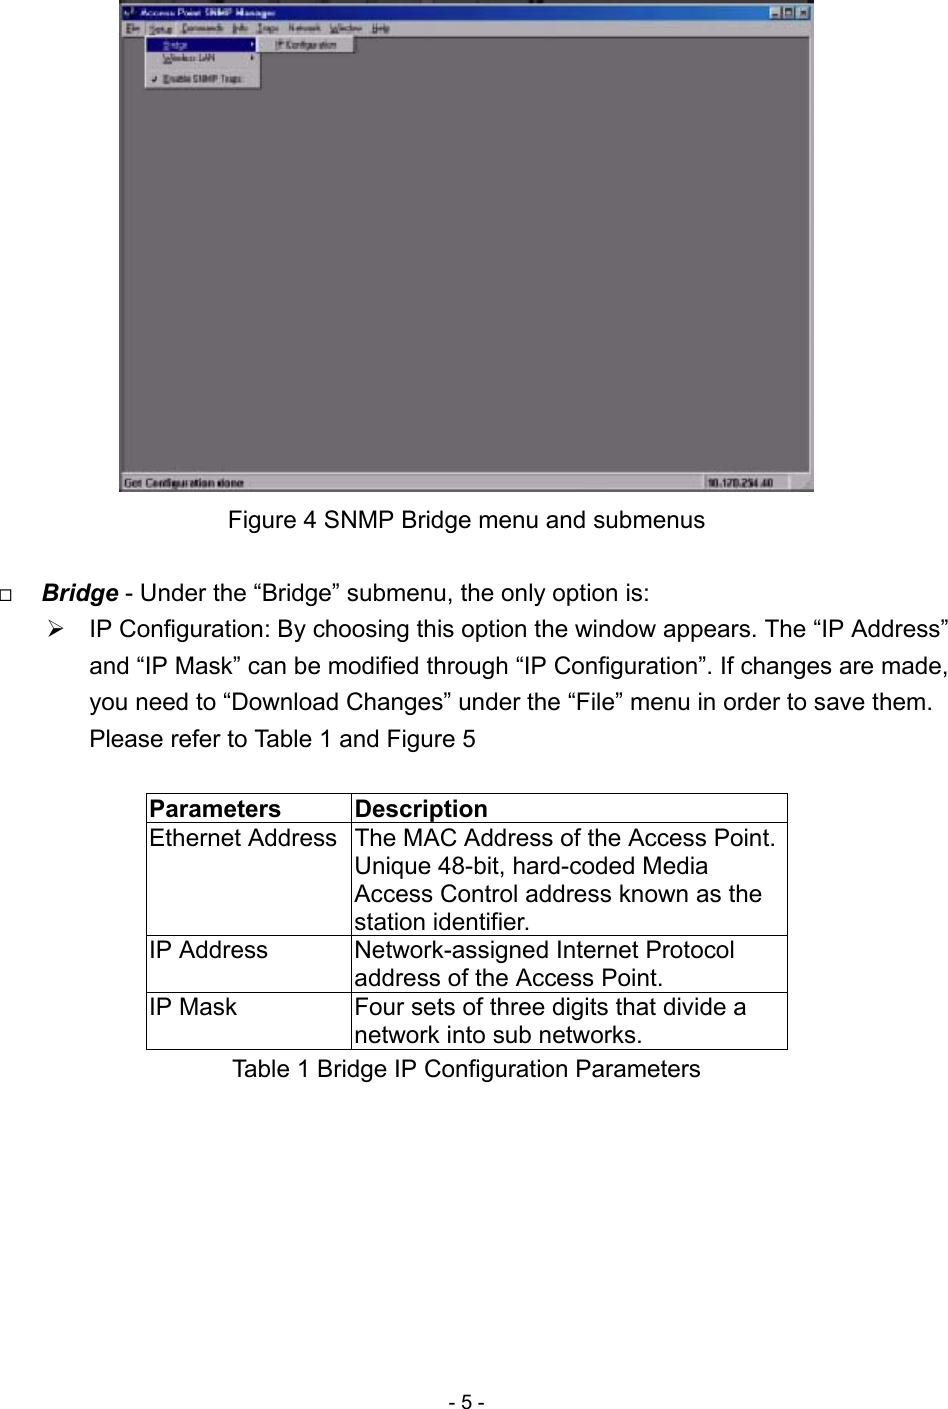 - 5 -  Figure 4 SNMP Bridge menu and submenus    Bridge - Under the “Bridge” submenu, the only option is:  IP Configuration: By choosing this option the window appears. The “IP Address” and “IP Mask” can be modified through “IP Configuration”. If changes are made, you need to “Download Changes” under the “File” menu in order to save them. Please refer to Table 1 and Figure 5  Parameters   Description Ethernet Address  The MAC Address of the Access Point. Unique 48-bit, hard-coded Media Access Control address known as the station identifier. IP Address  Network-assigned Internet Protocol address of the Access Point. IP Mask  Four sets of three digits that divide a network into sub networks. Table 1 Bridge IP Configuration Parameters  